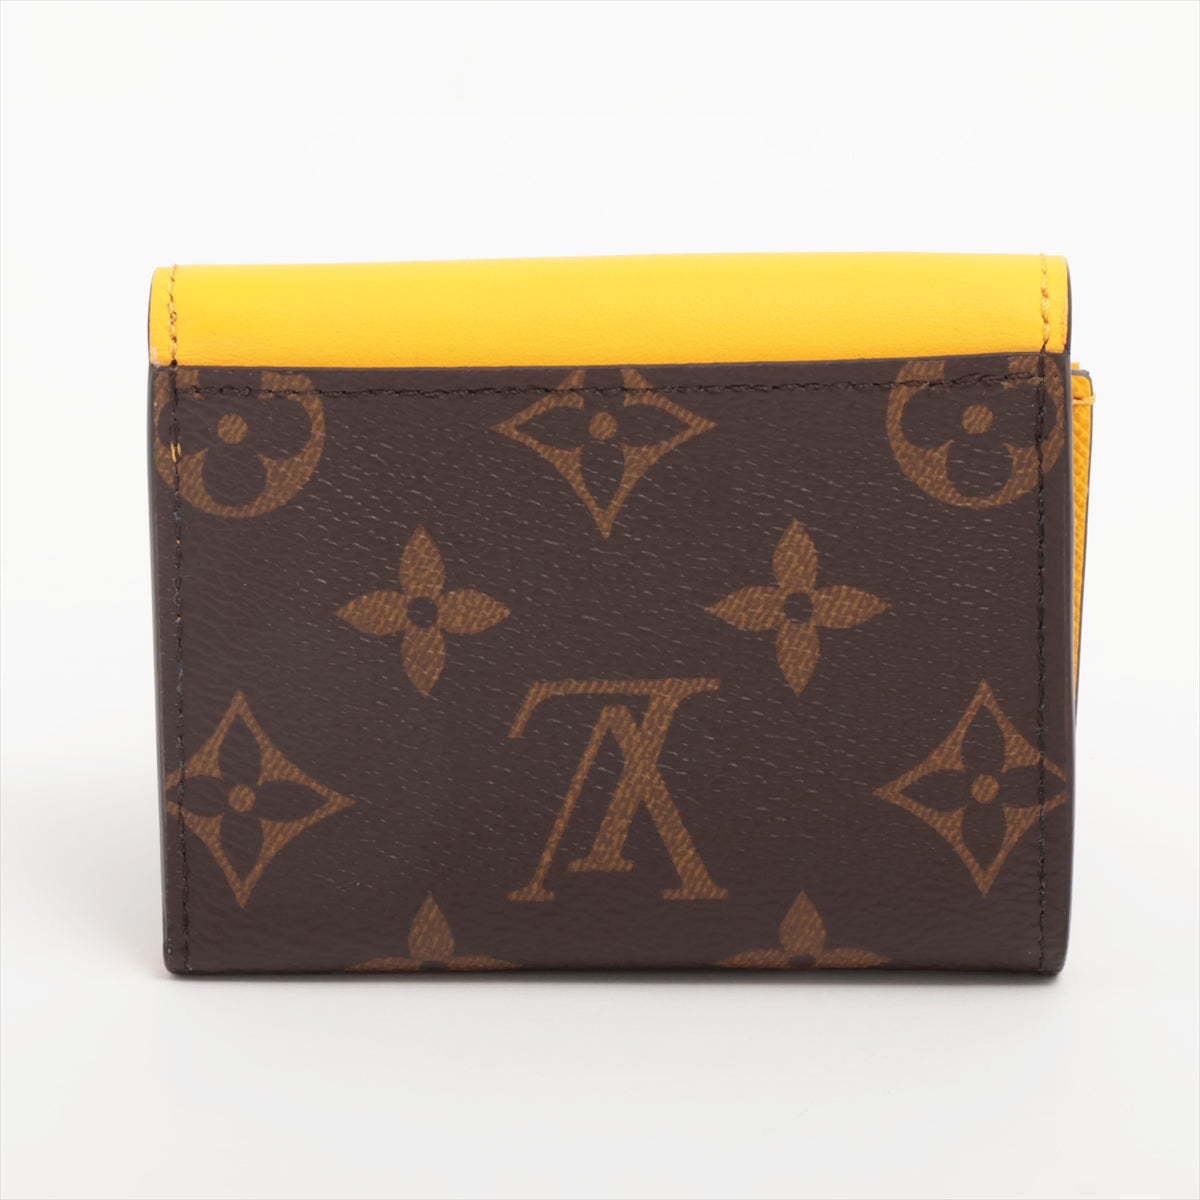 Louis Vuitton Monogram Portefeuille Zoé M82984 M82984 There was an RFID response